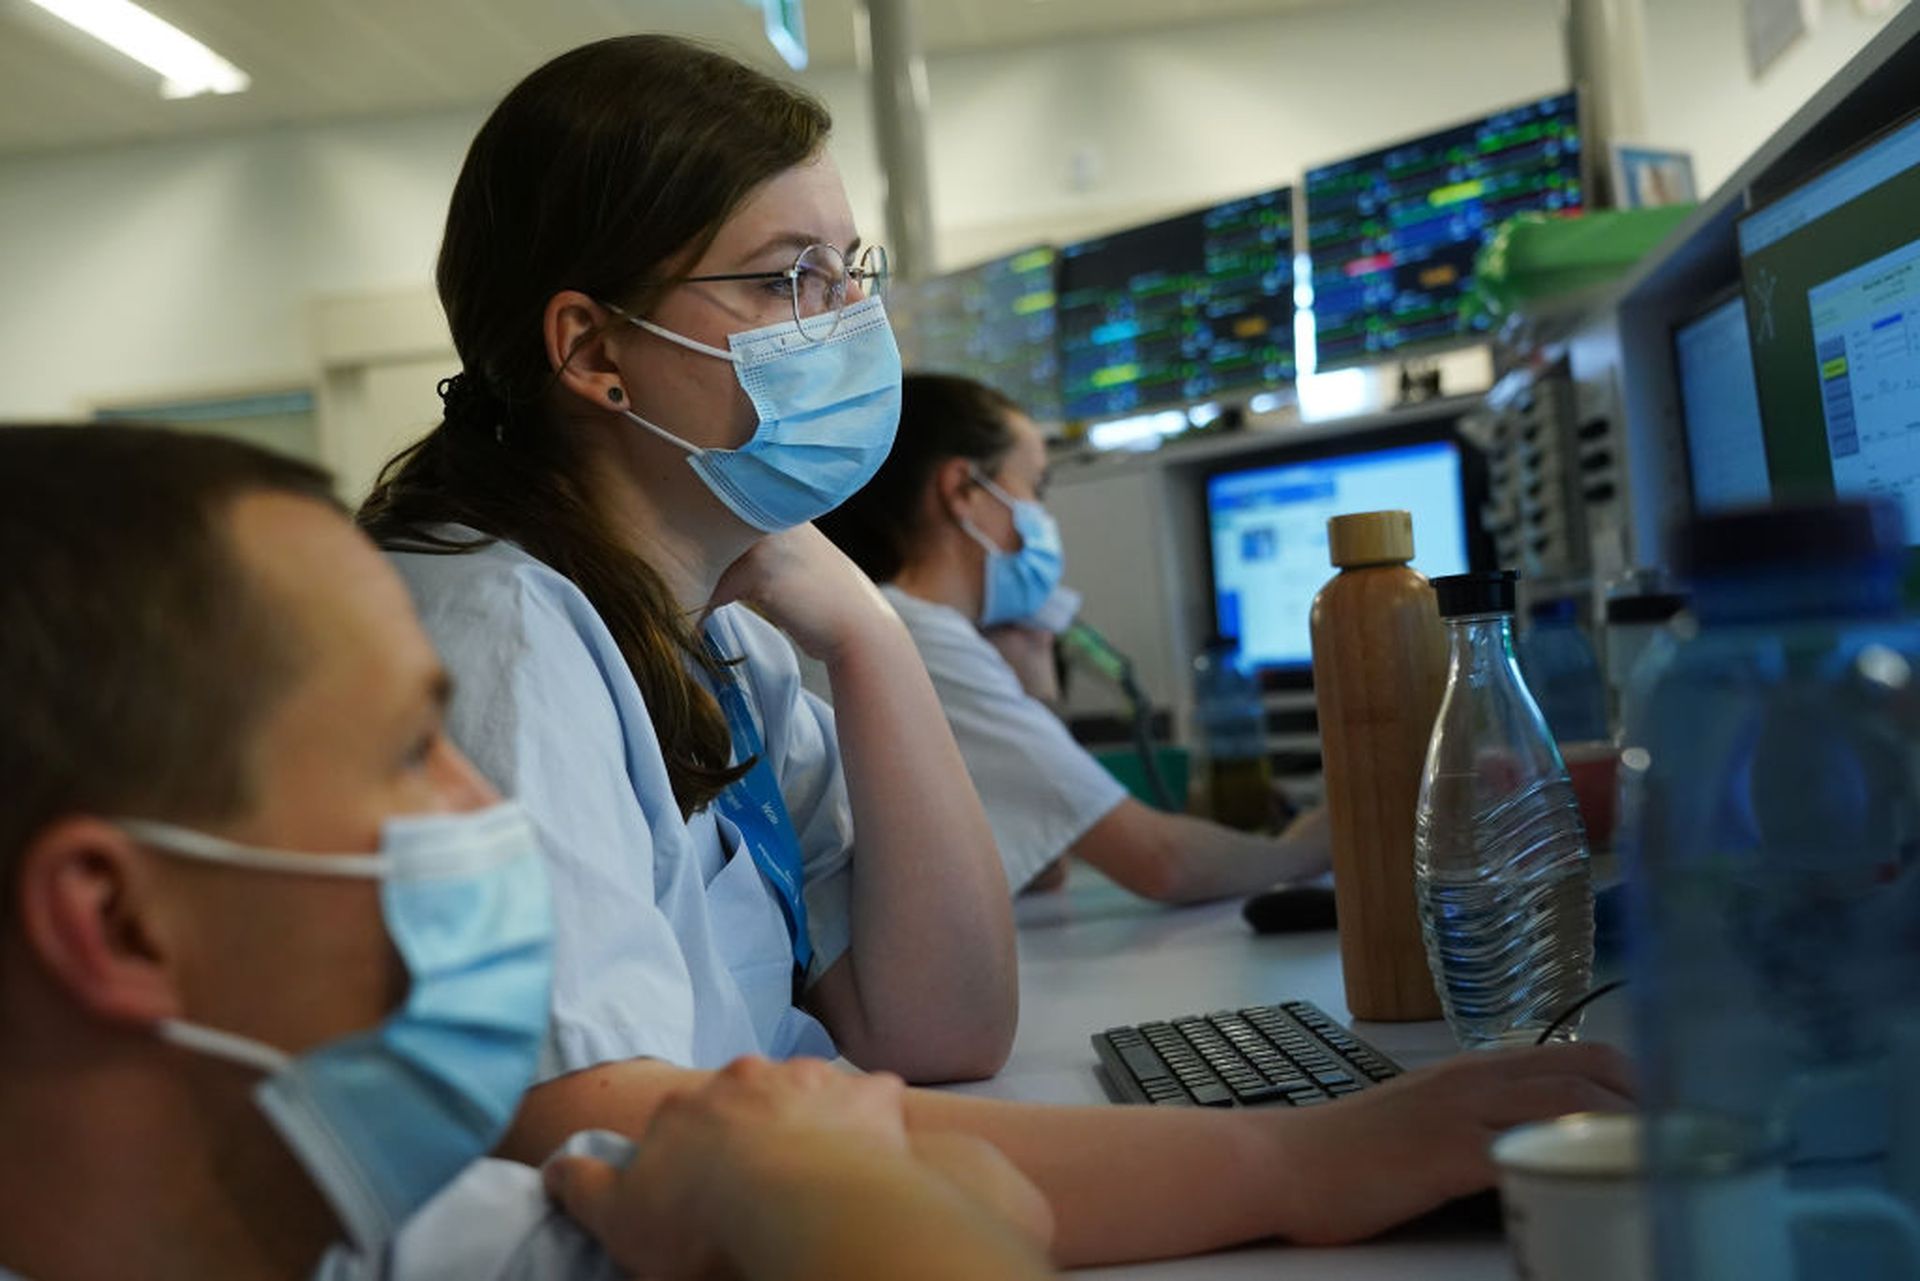 Hospital staff sit at computer monitors as monitors placed above show data from individual patients in the COVID intensive care unit at Leipzig university hospital (Universitaetsklinikum Leipzig) during the second wave of the coronavirus pandemic on January 12, 2021 in Leipzig, Germany. The hospital currently has 43 Covid patients in intensive care...